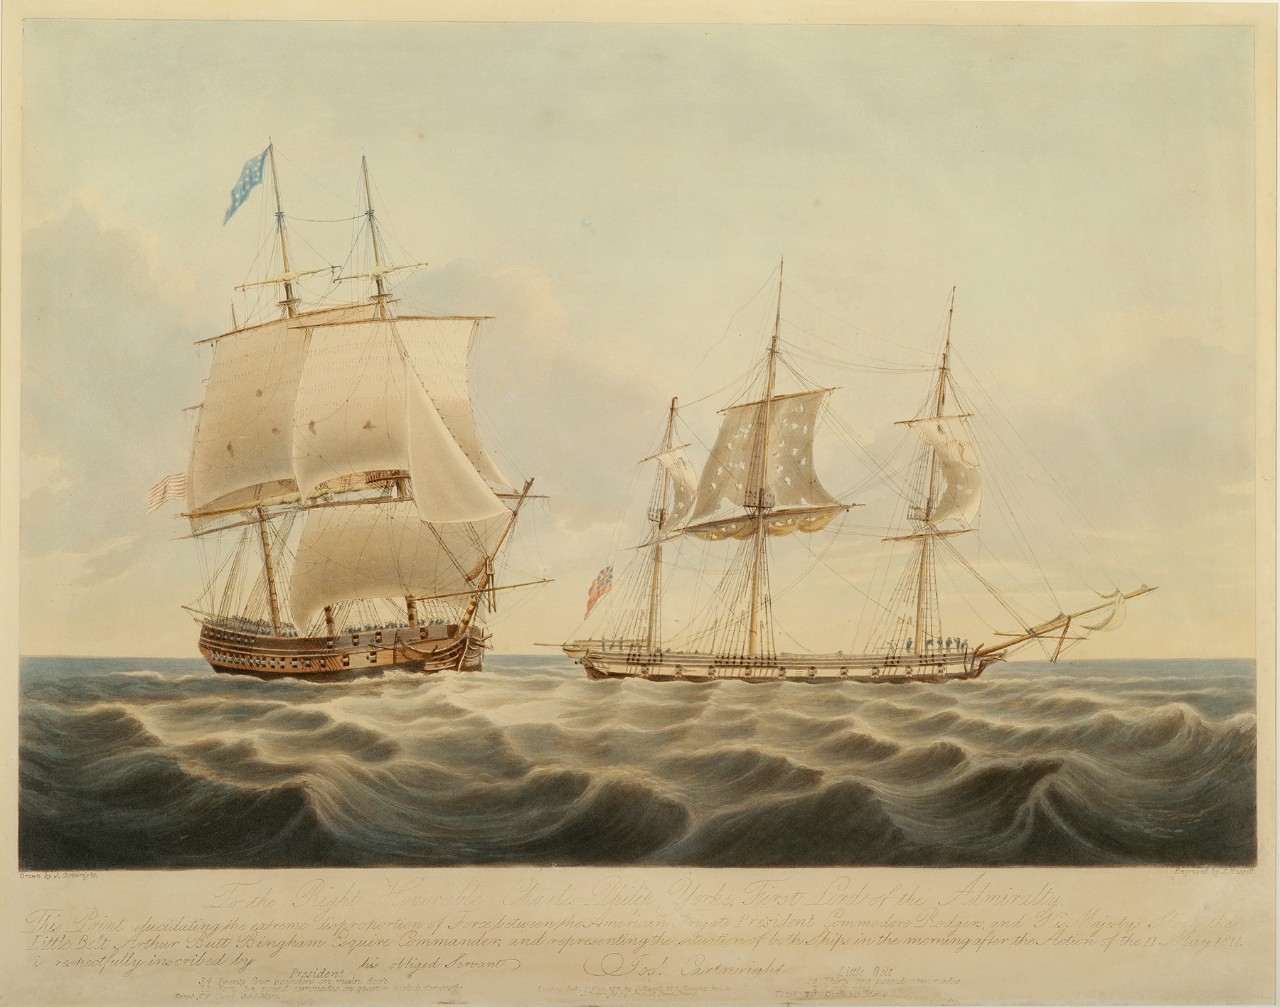 The larger American ship on the left is closing in on the damaged smaller British ship on the right